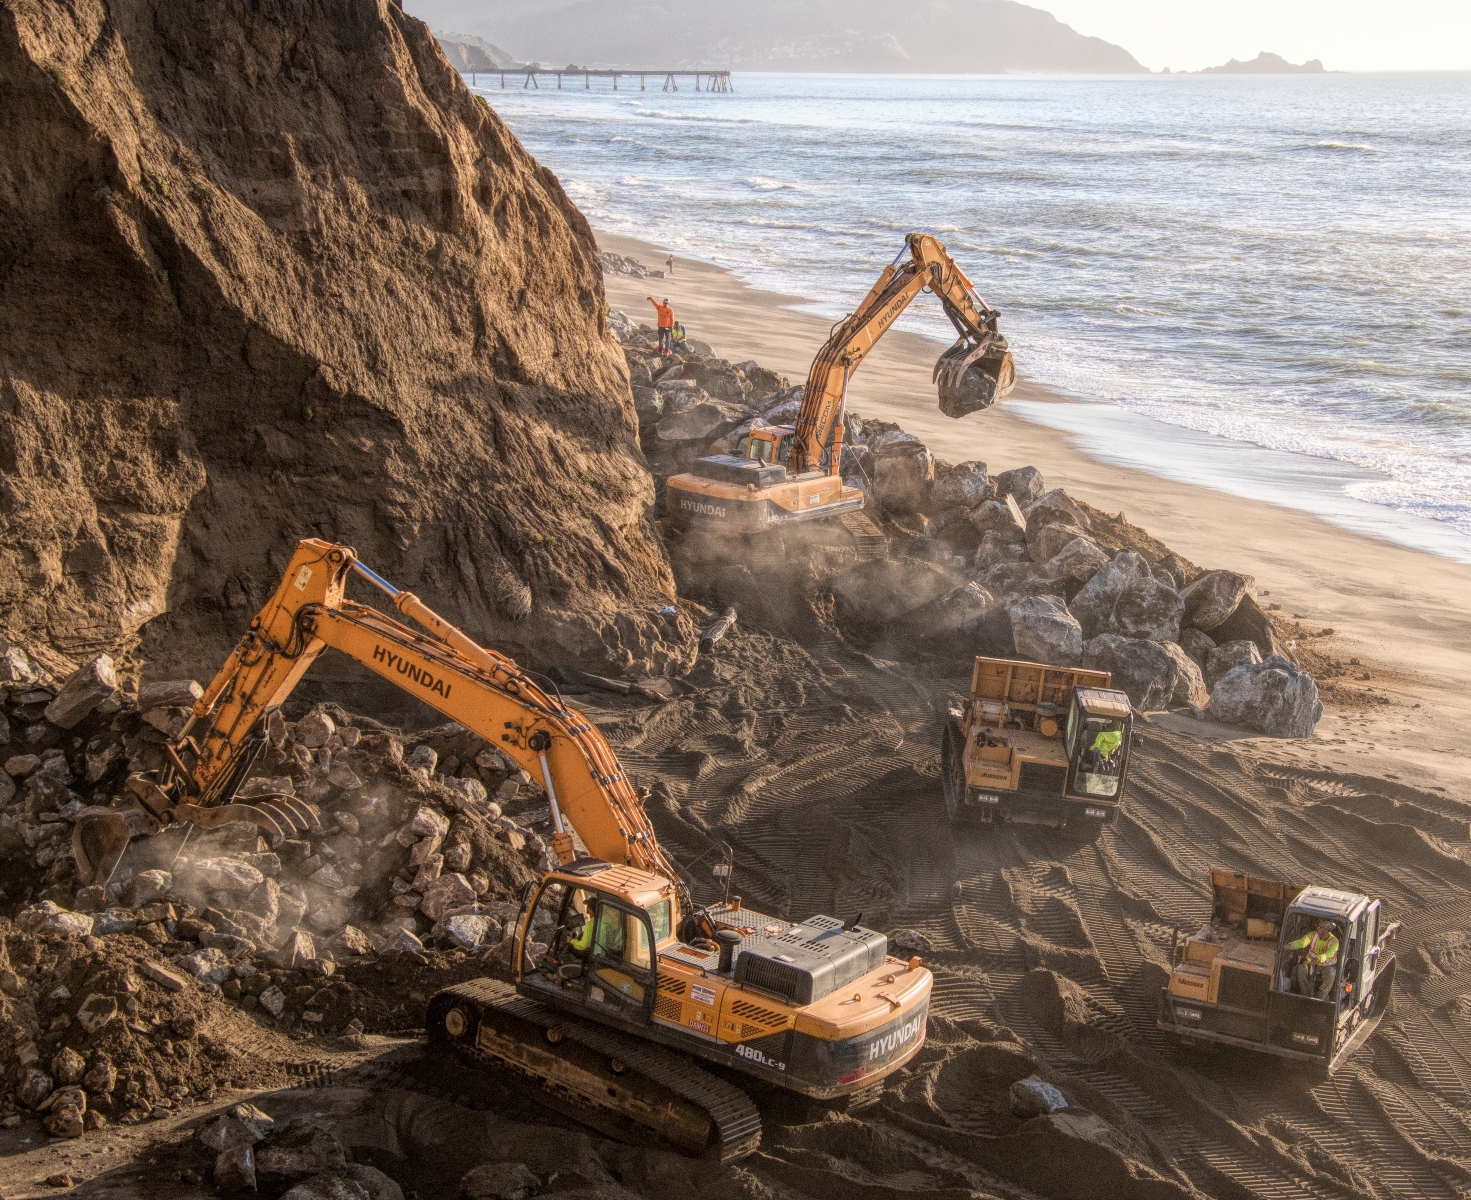 Workers positioning large boulders at the base of a Pacifica cliff in an attempt to prevent further erosion.